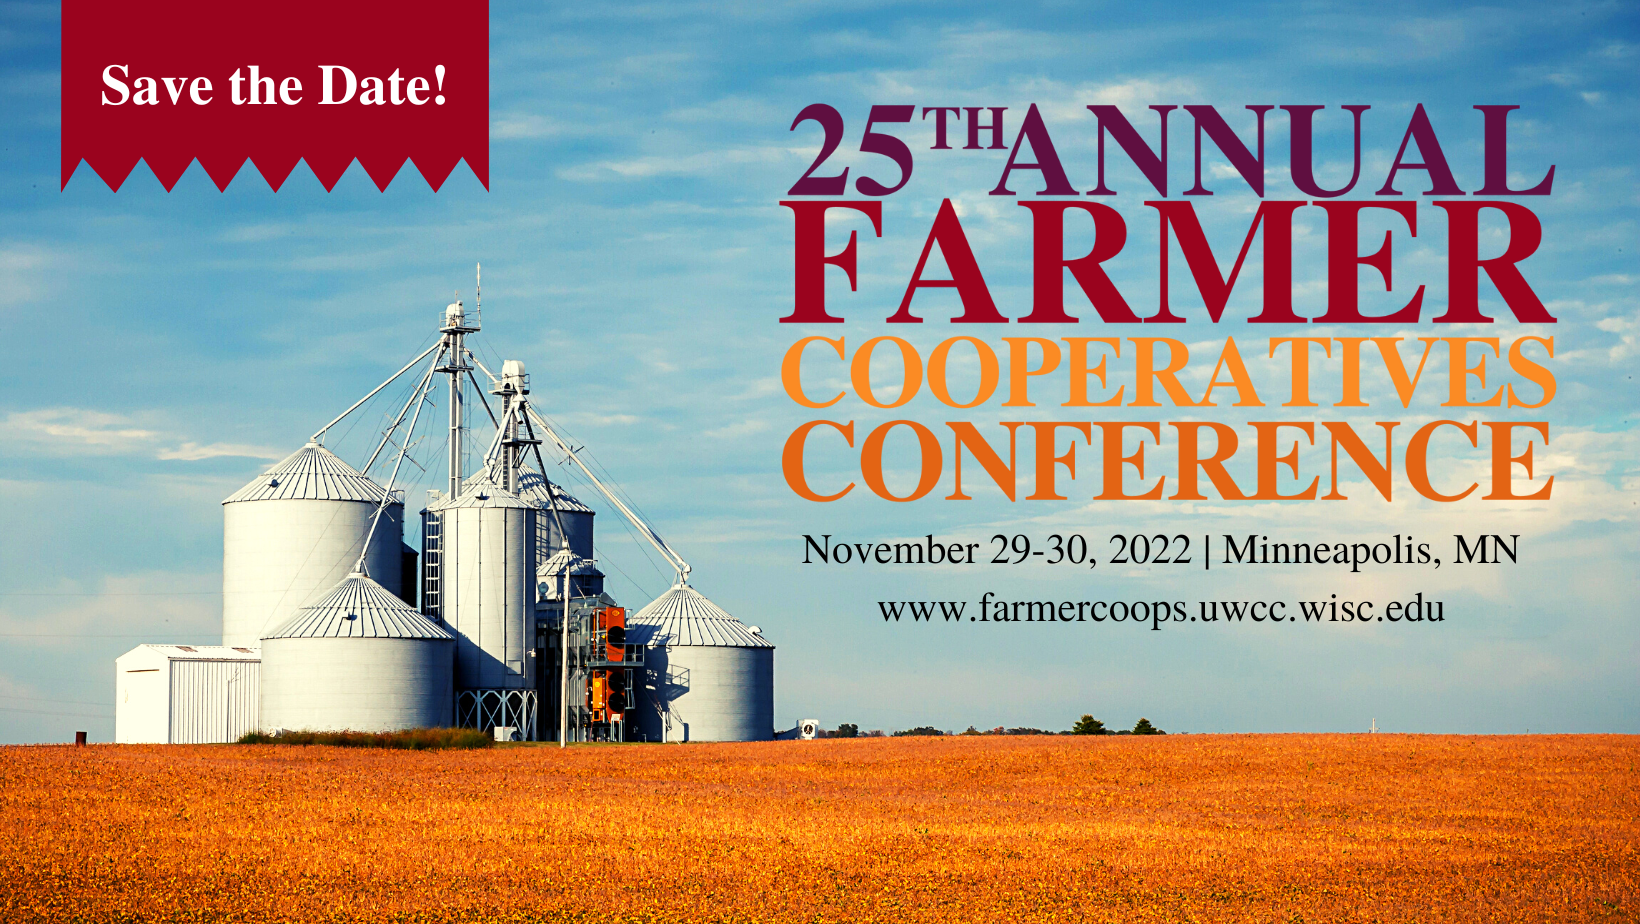 Horizontal picture of grain elevator with field of harvested grain. 23th annual farmer cooperatives conference, November 29-30, 2022, Minneapolis, MN.